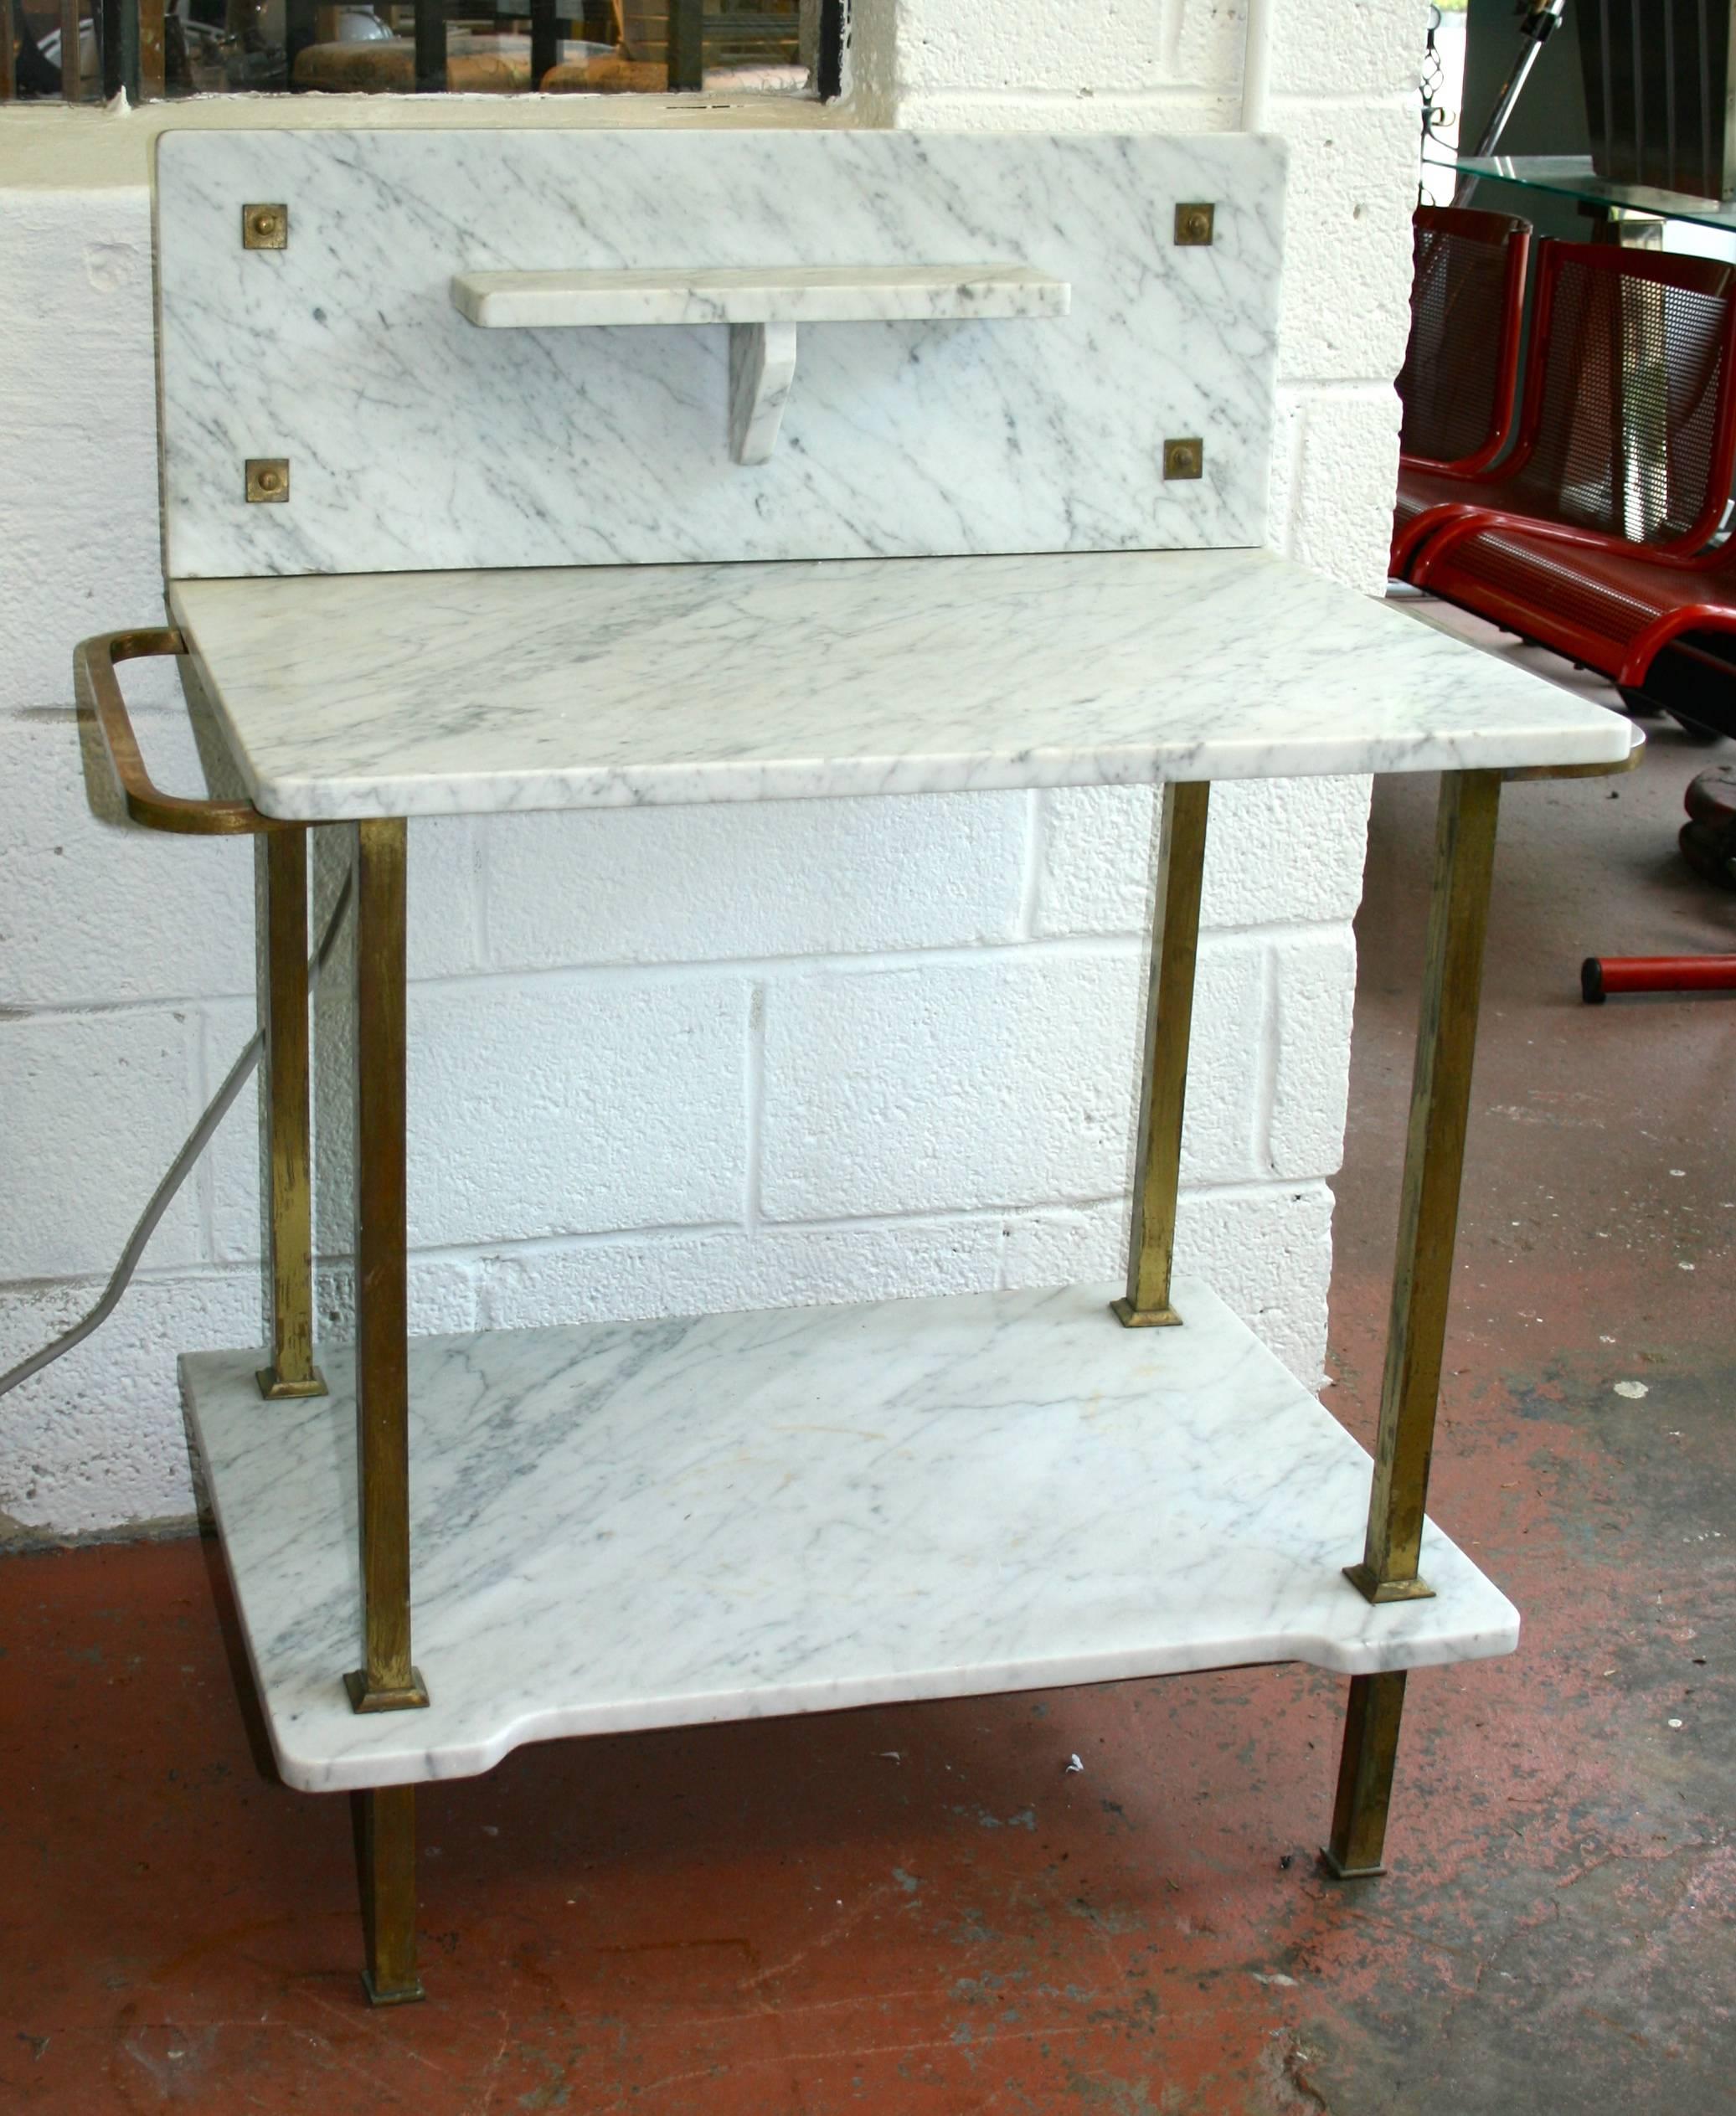 Tiered marble serving table with brass base and detail. Main surface is
29.75